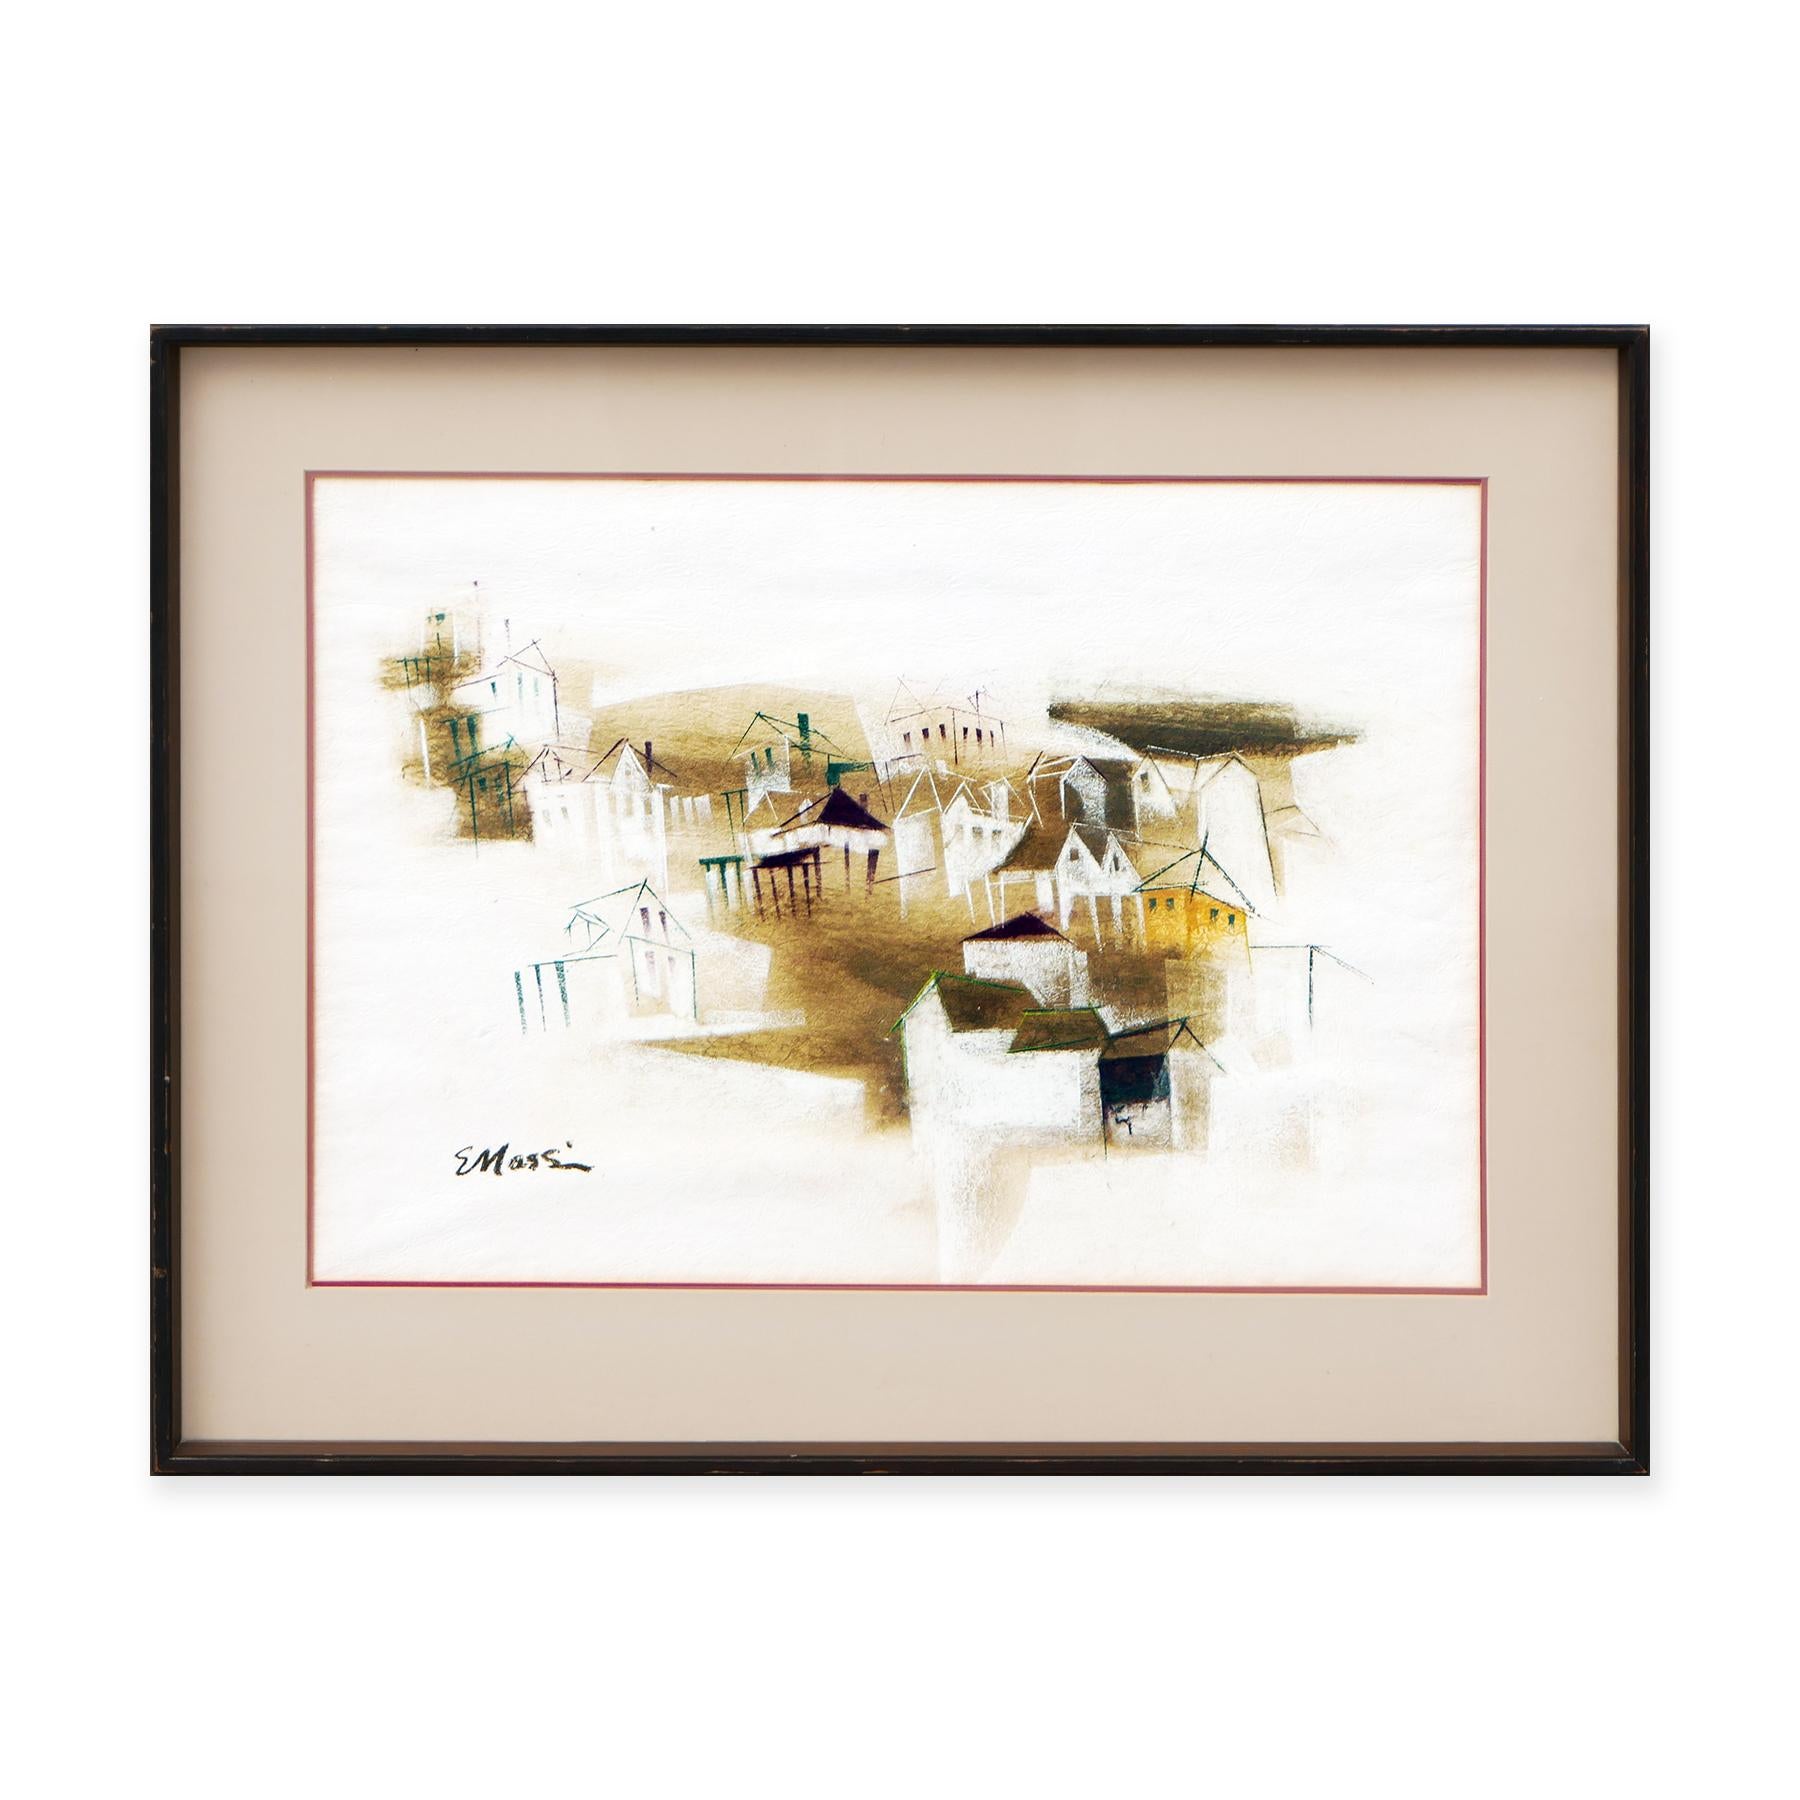 Modern Minimalist Ochre and White Toned Abstract City Landscape Pastel Drawing - Art by Eugene Massin